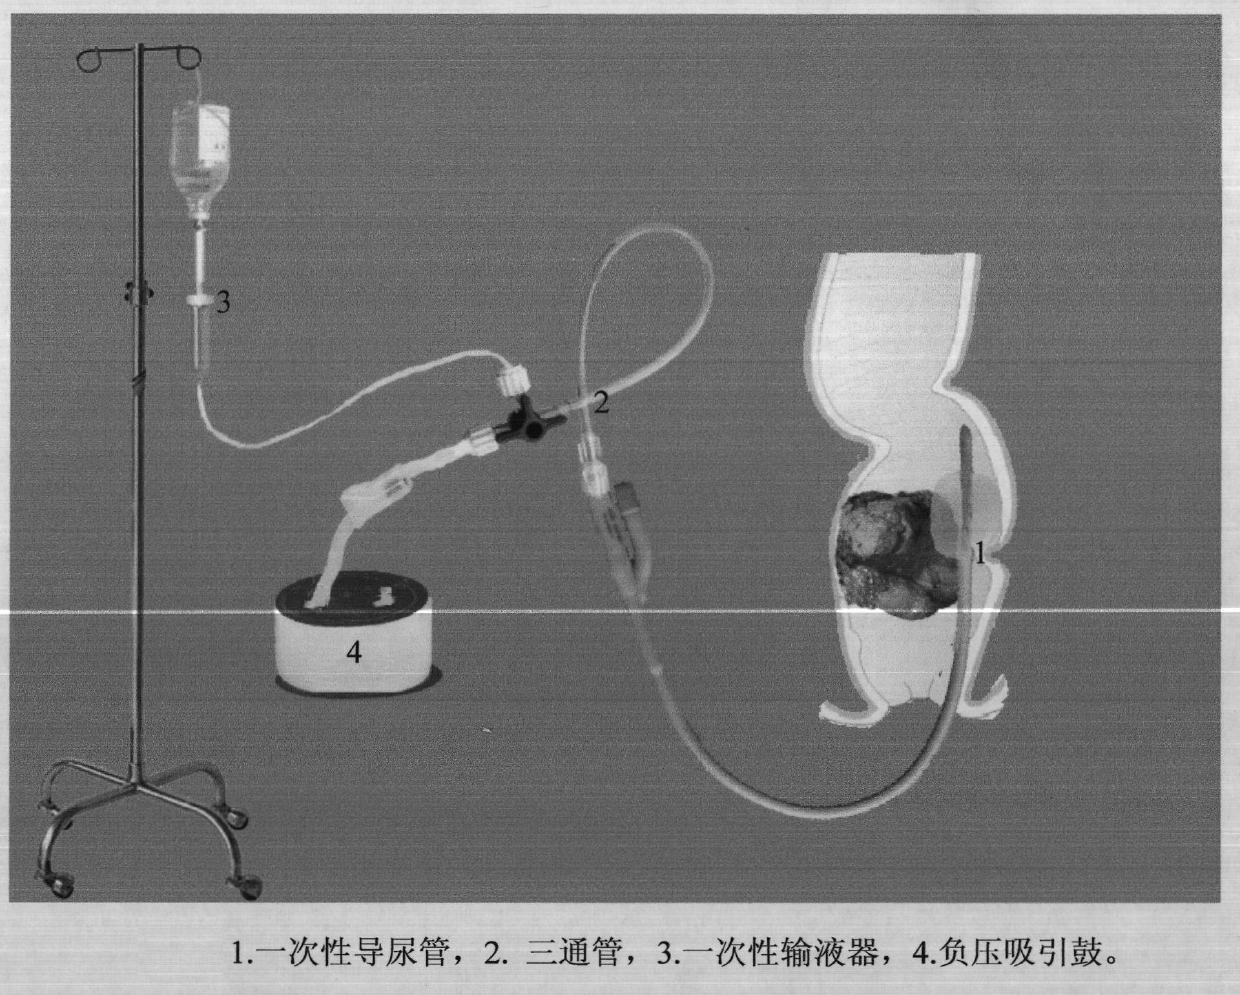 Defecating apparatus for removing intestinal obstruction